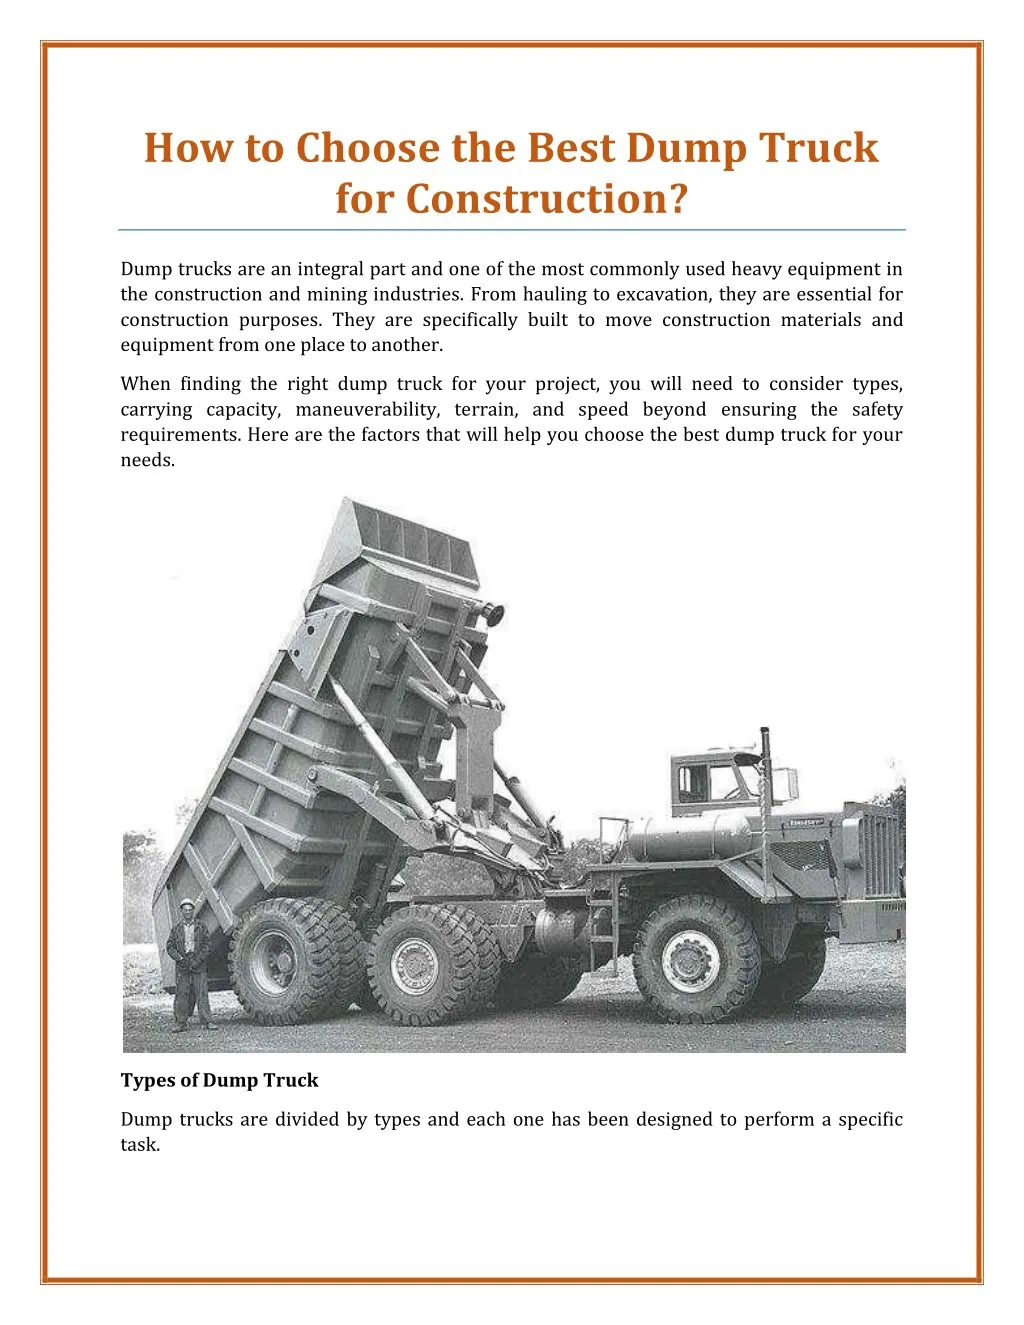 how to choose the best dump truck for construction